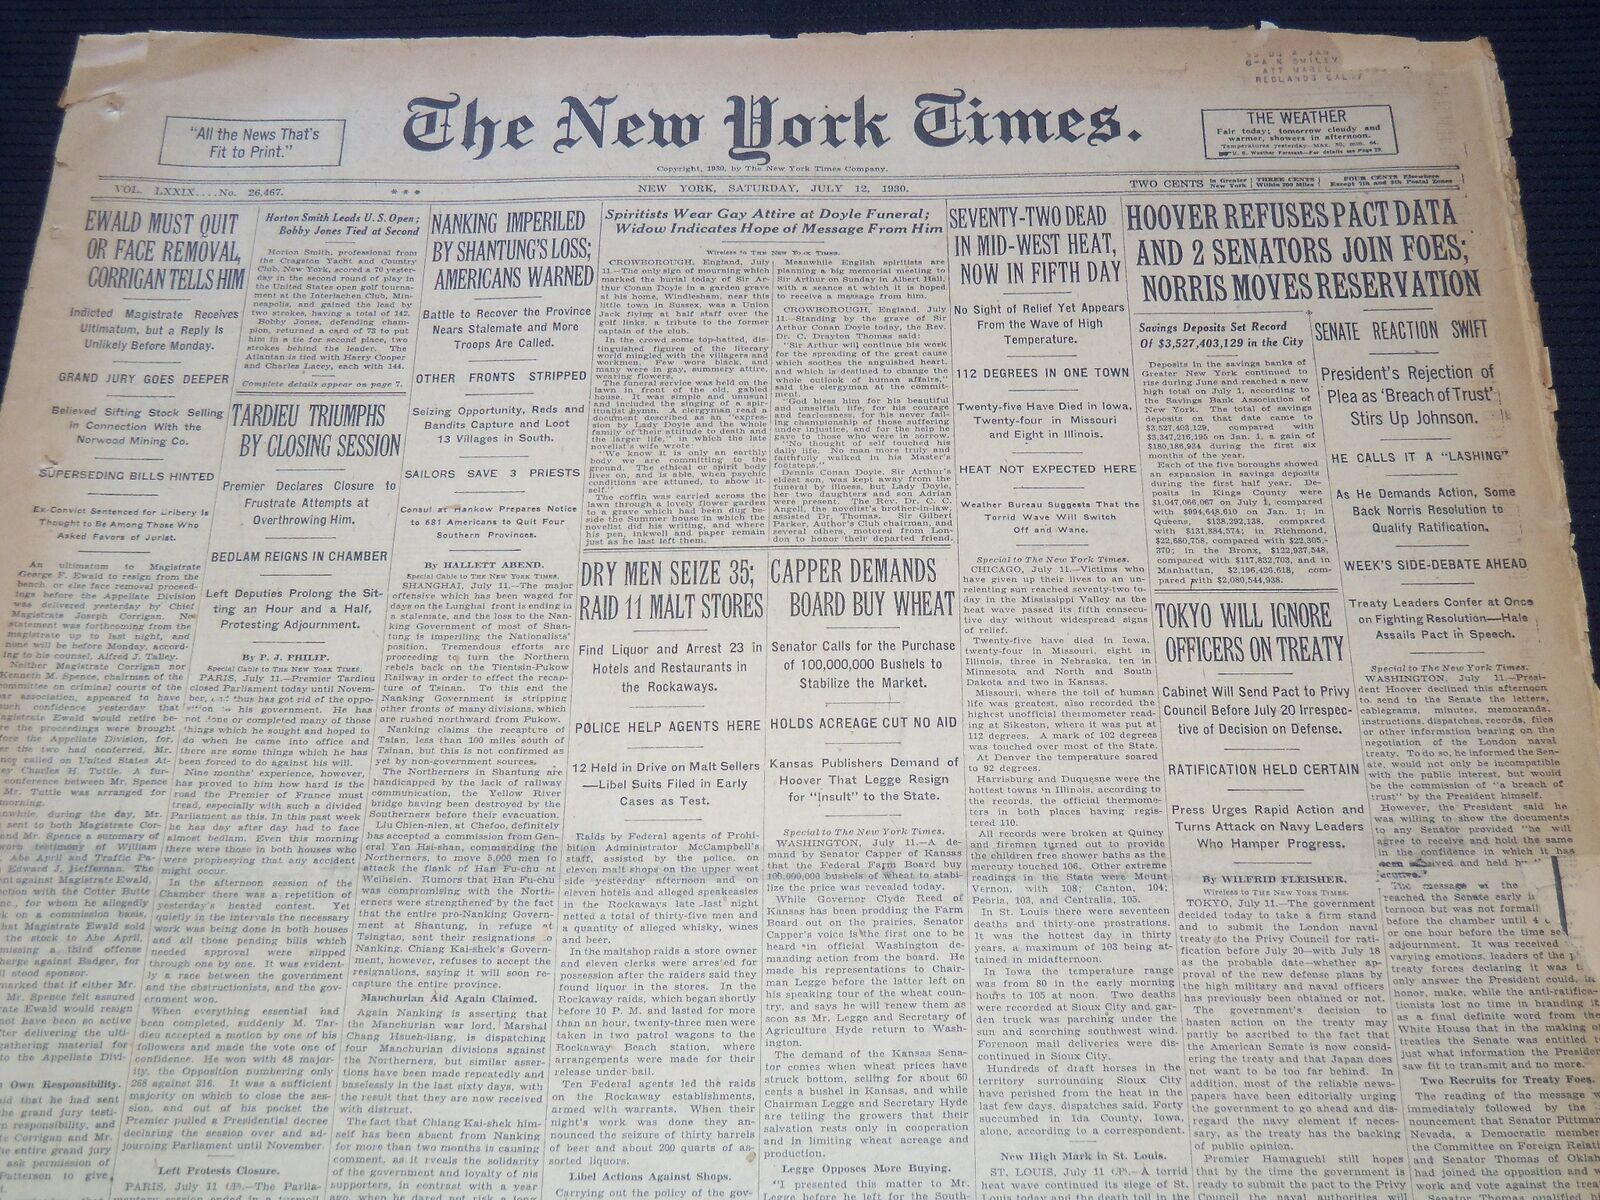 1930 JULY 12 NEW YORK TIMES NEWSPAPER - JONES WITH 144 TIED FOR SECOND - NT 9430